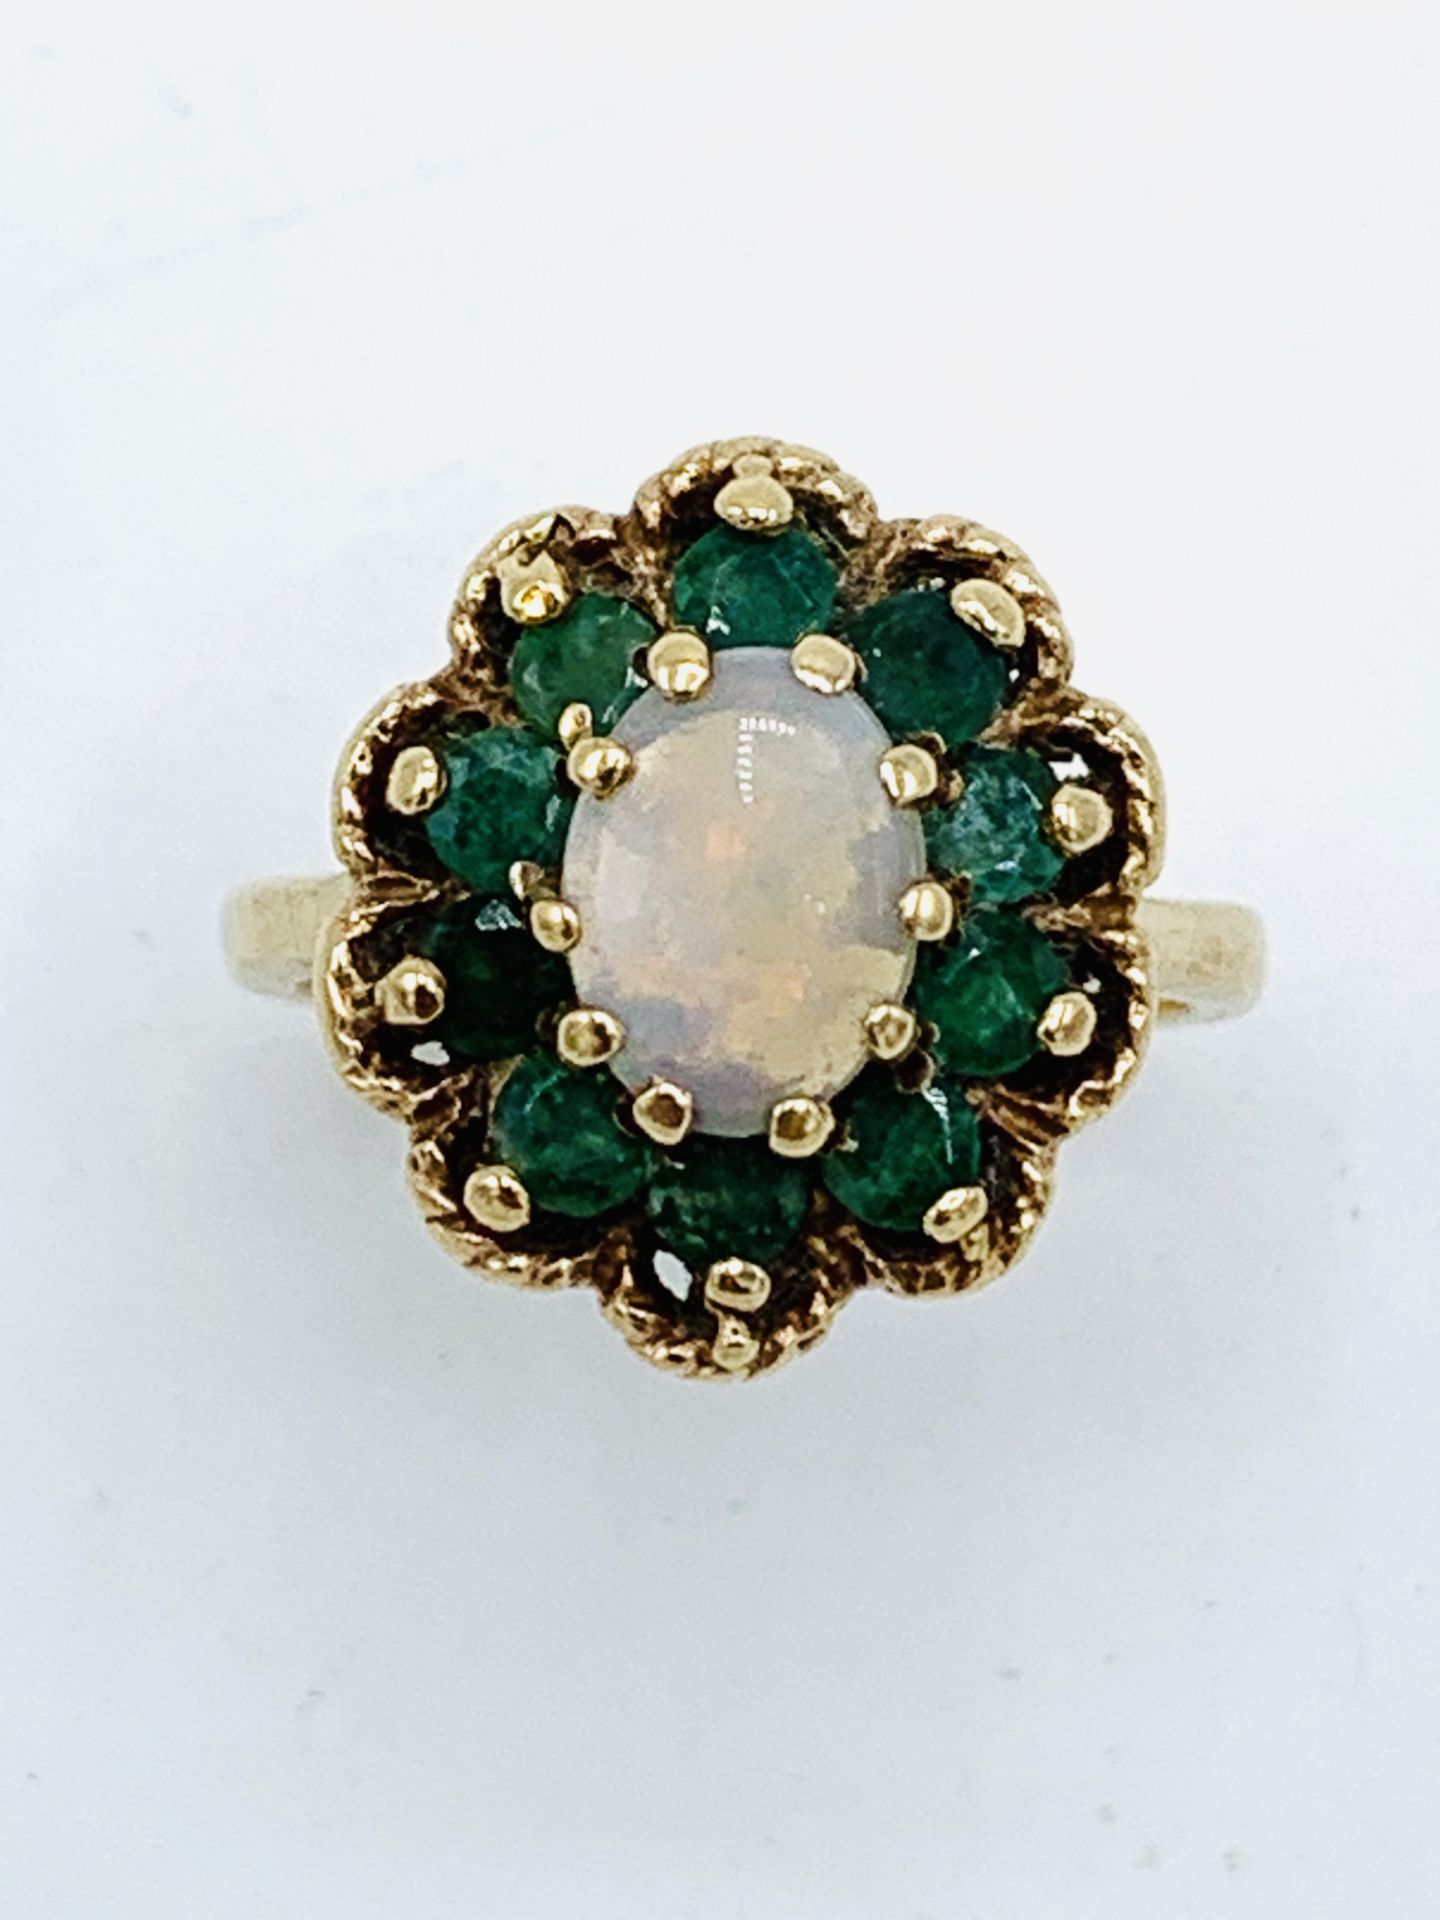 9ct gold, opal and pale green stone ring, 4.5gms - Image 3 of 5